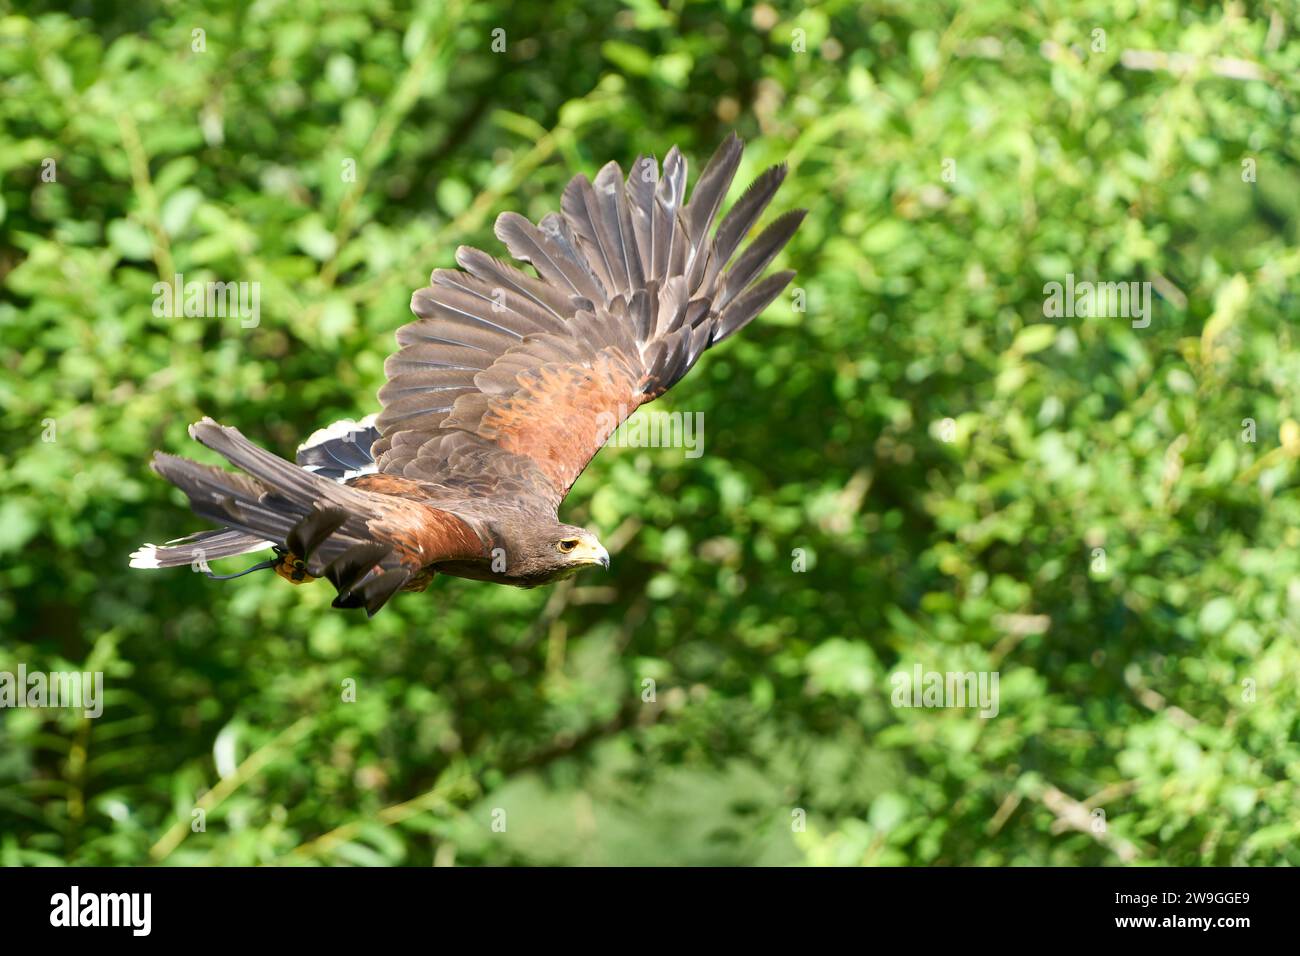 A hawk majestically gliding in the sky above a lush green forest. Stock Photo